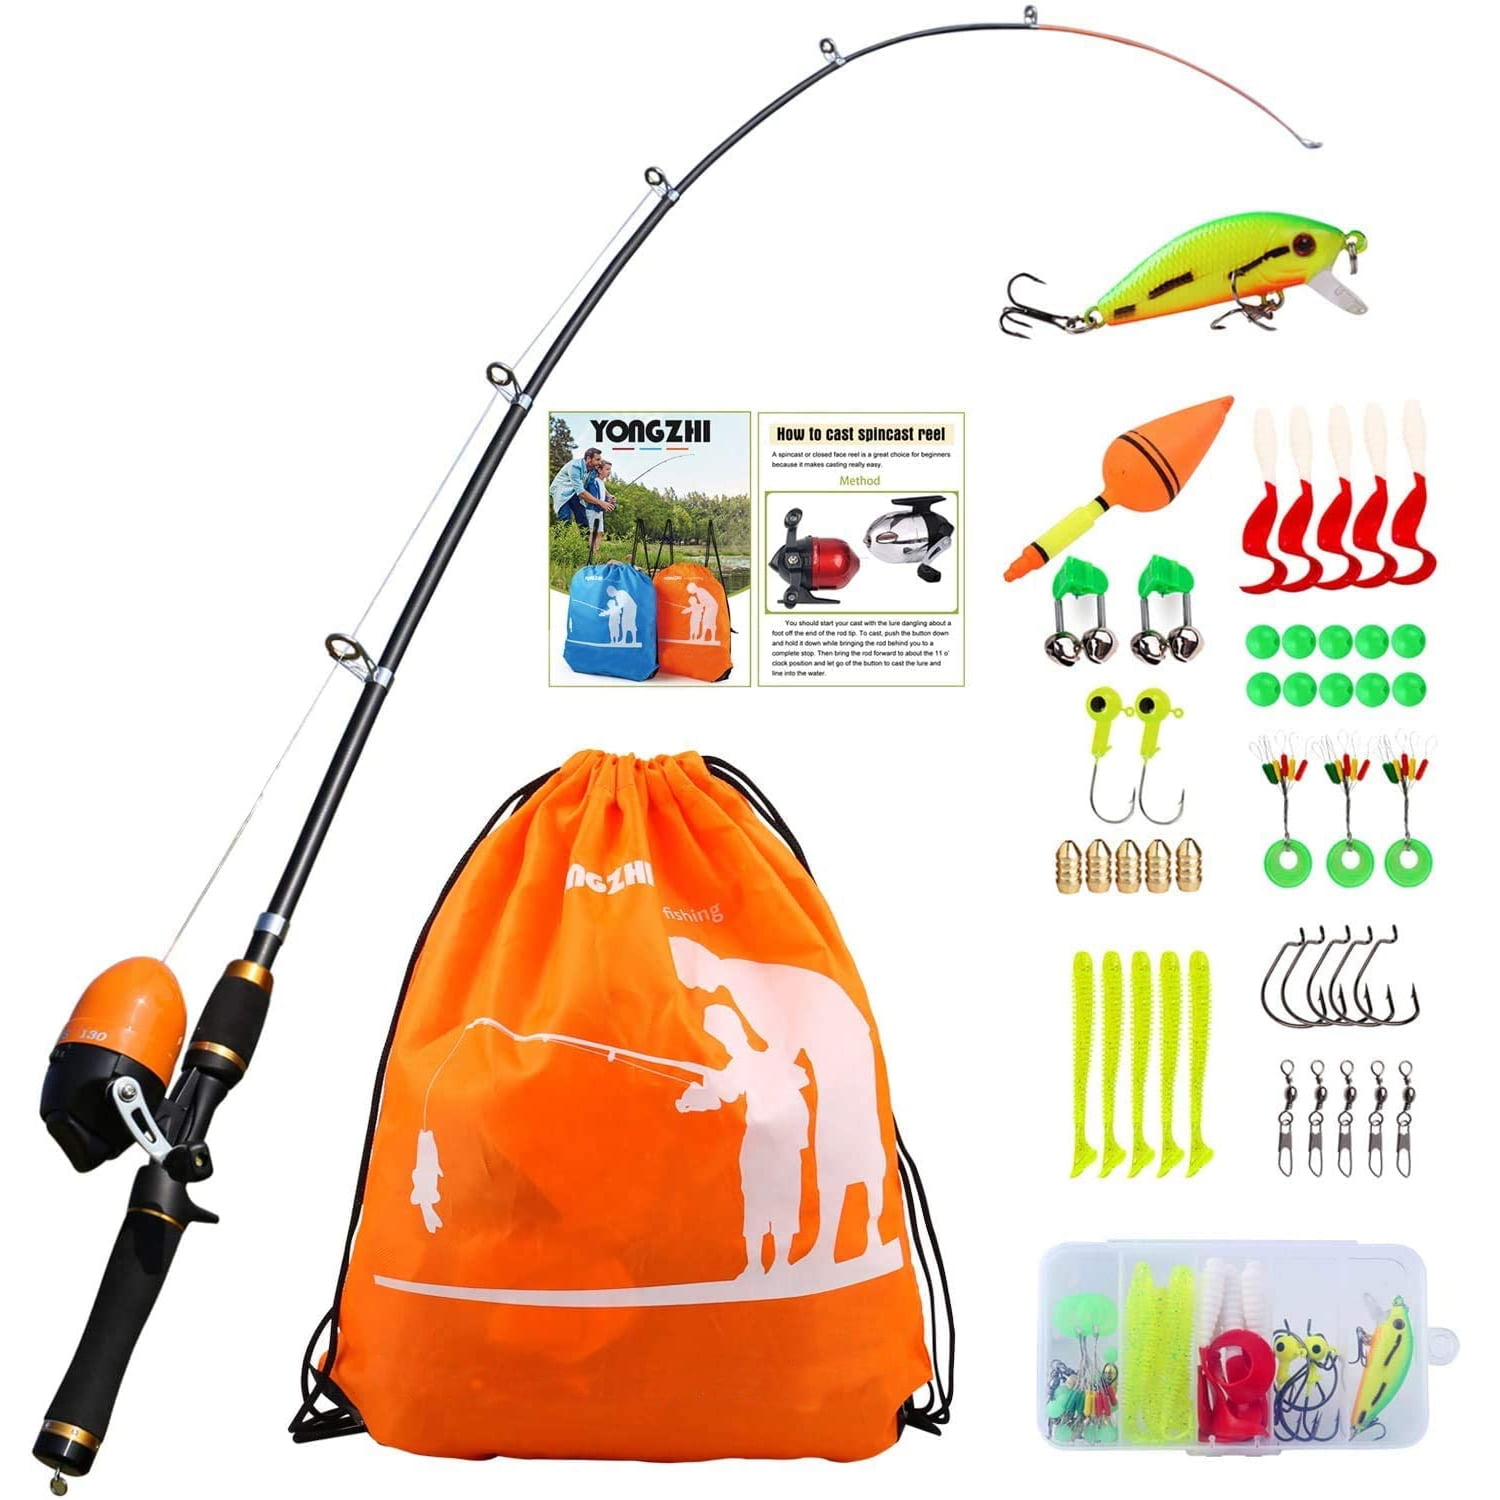 Sougayilang Kids Fishing Pole With Spinning Reels,Telescopic Fishing Rod For Travel Freshwater Bass Trout Fishing